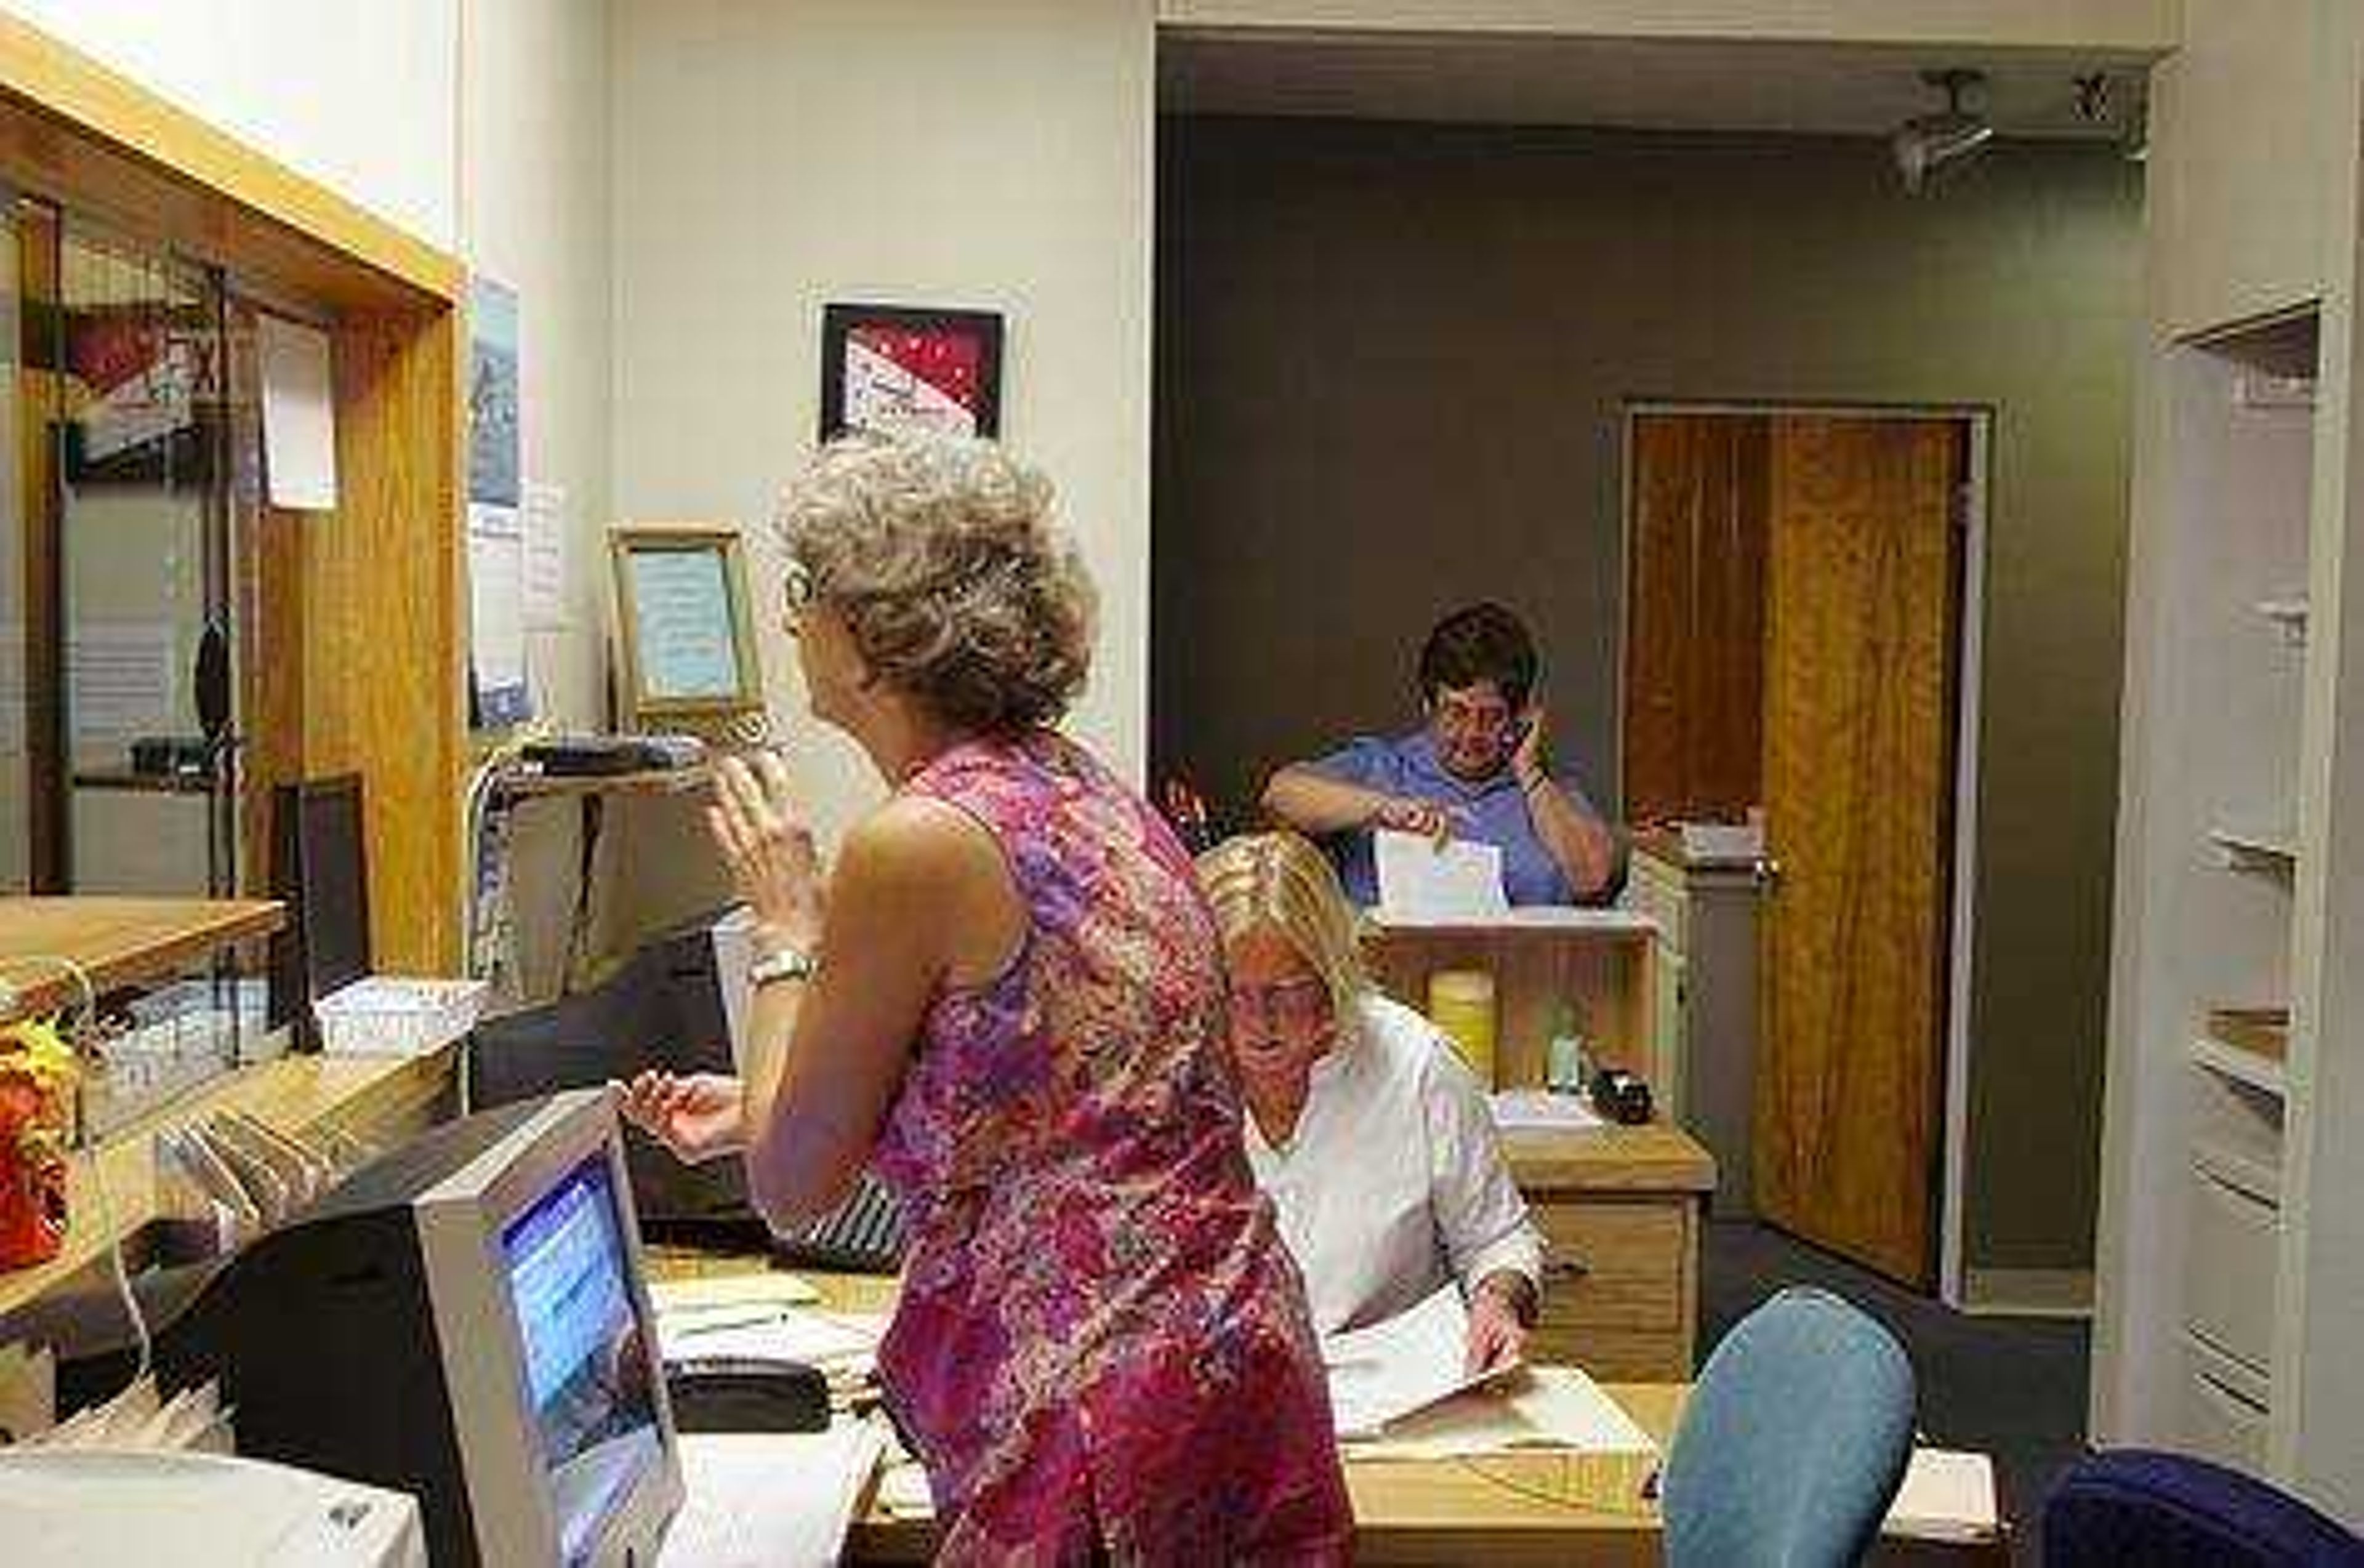 Andrea Sachse, Nancy Buchanan and Rhonda Sievers, the front desk staff, fill out paperwork. The clinic serves uninsured people. Photo by Nathan Hamilton